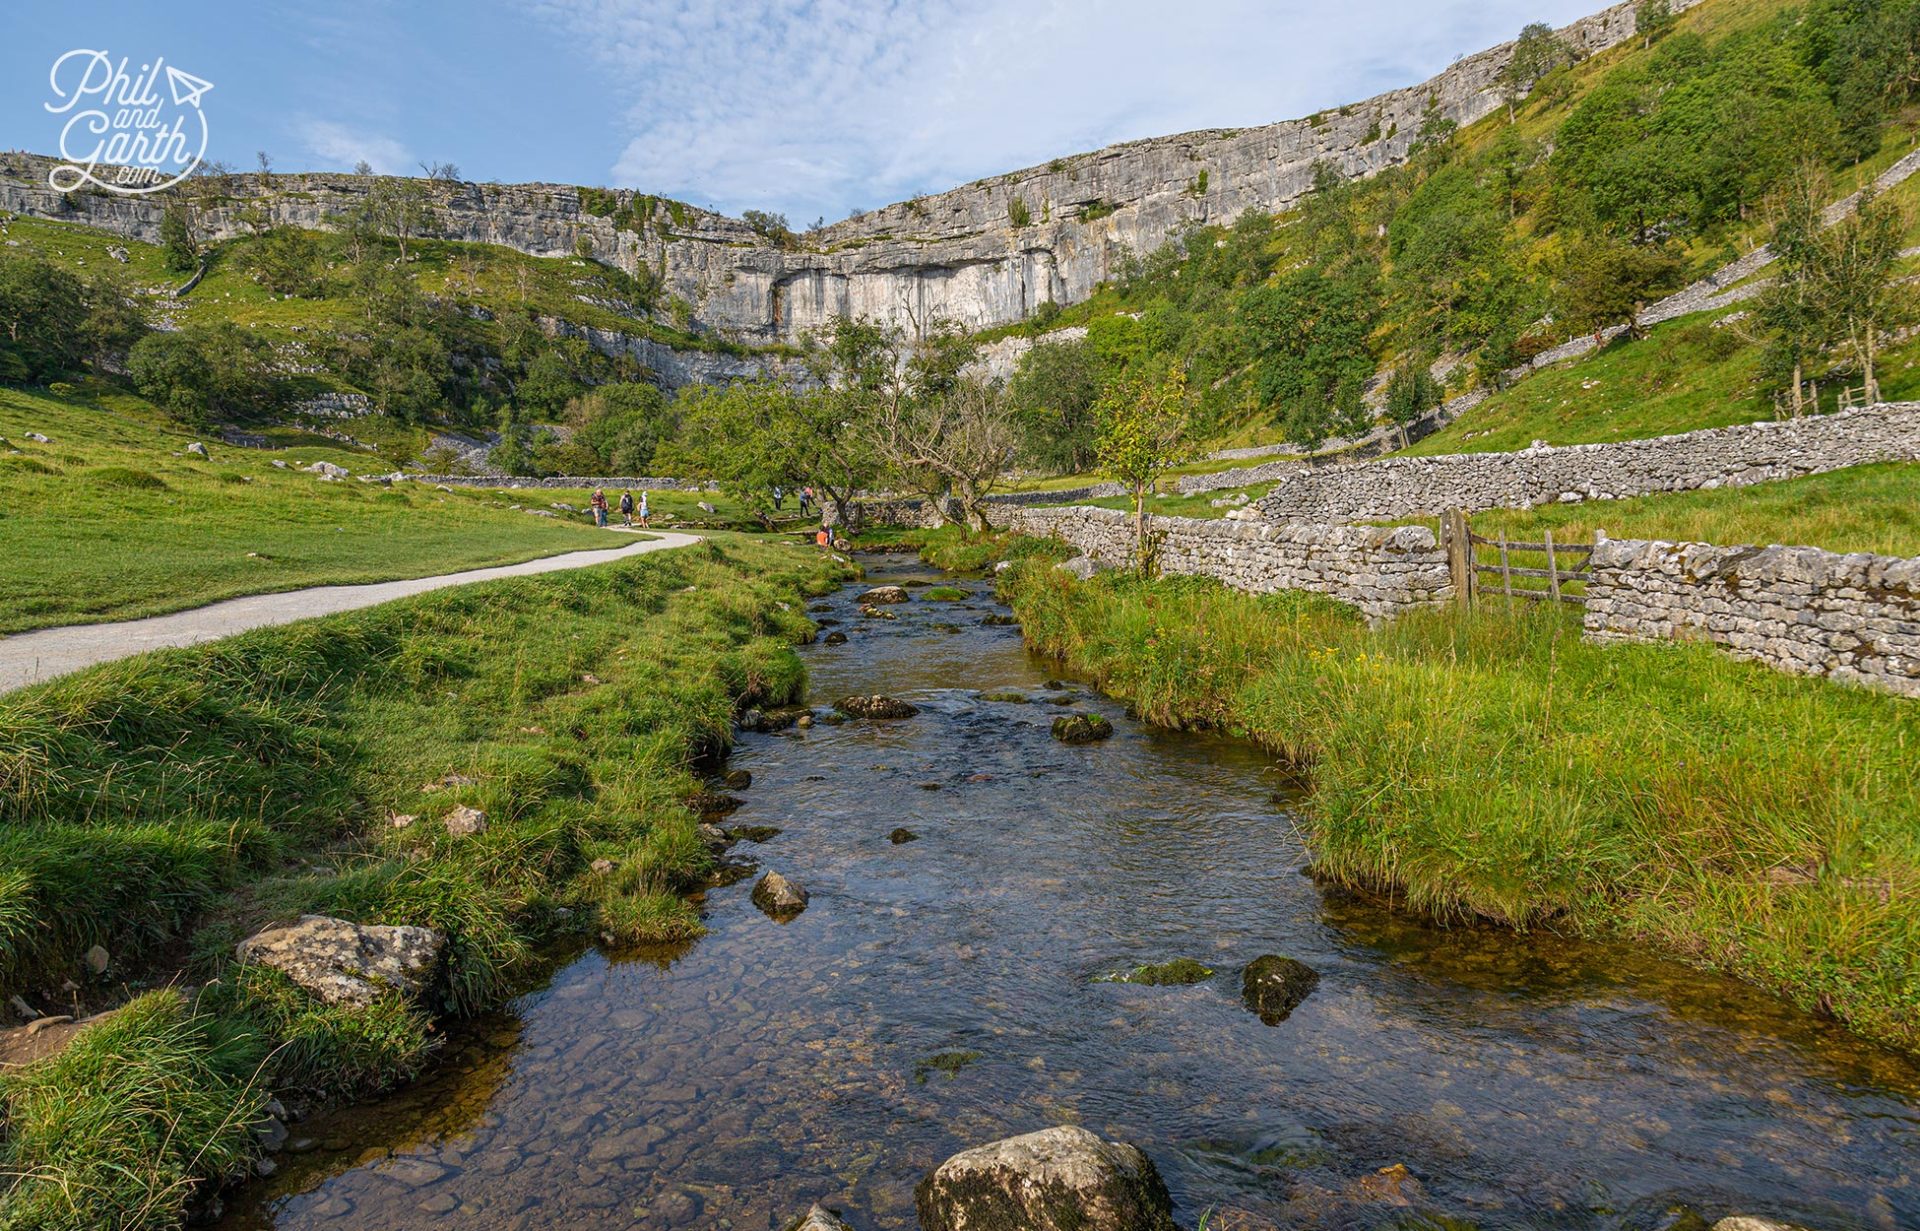 villages to visit in the yorkshire dales